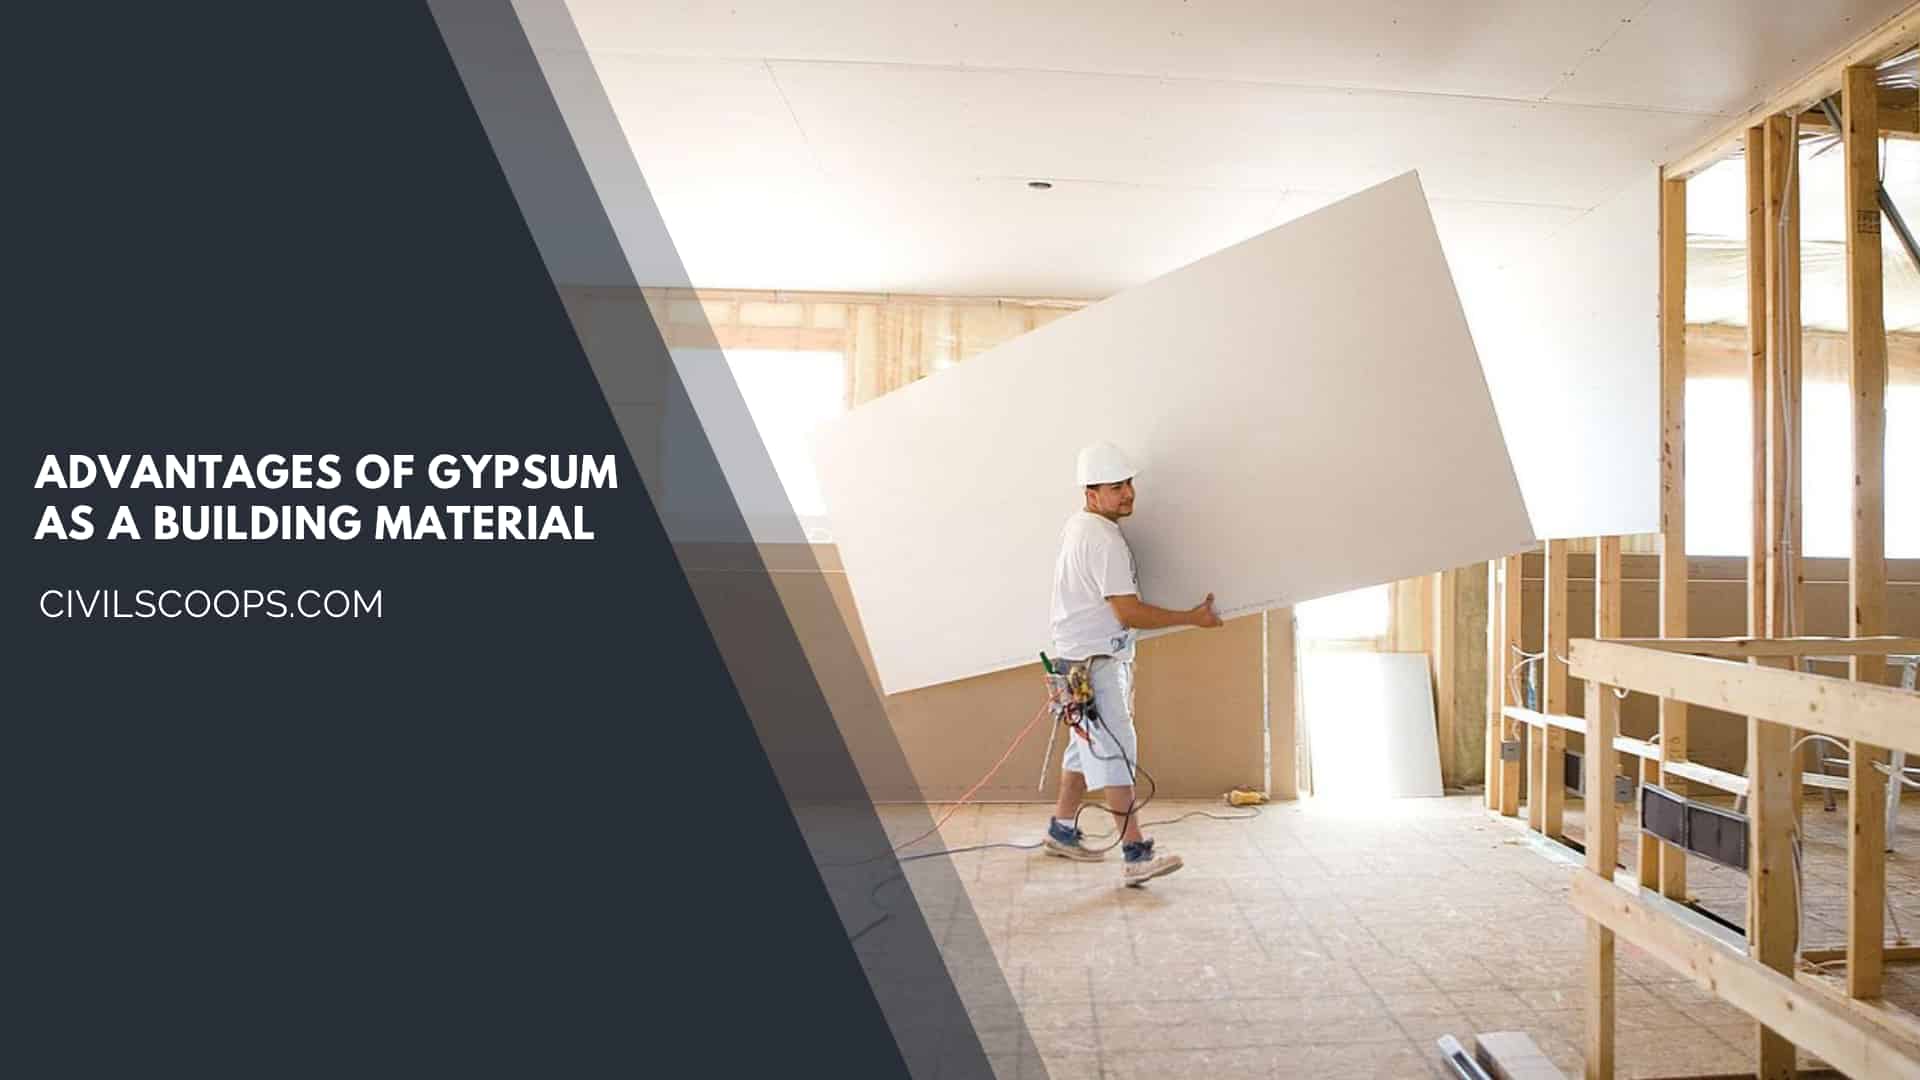 Advantages of Gypsum as a Building Material